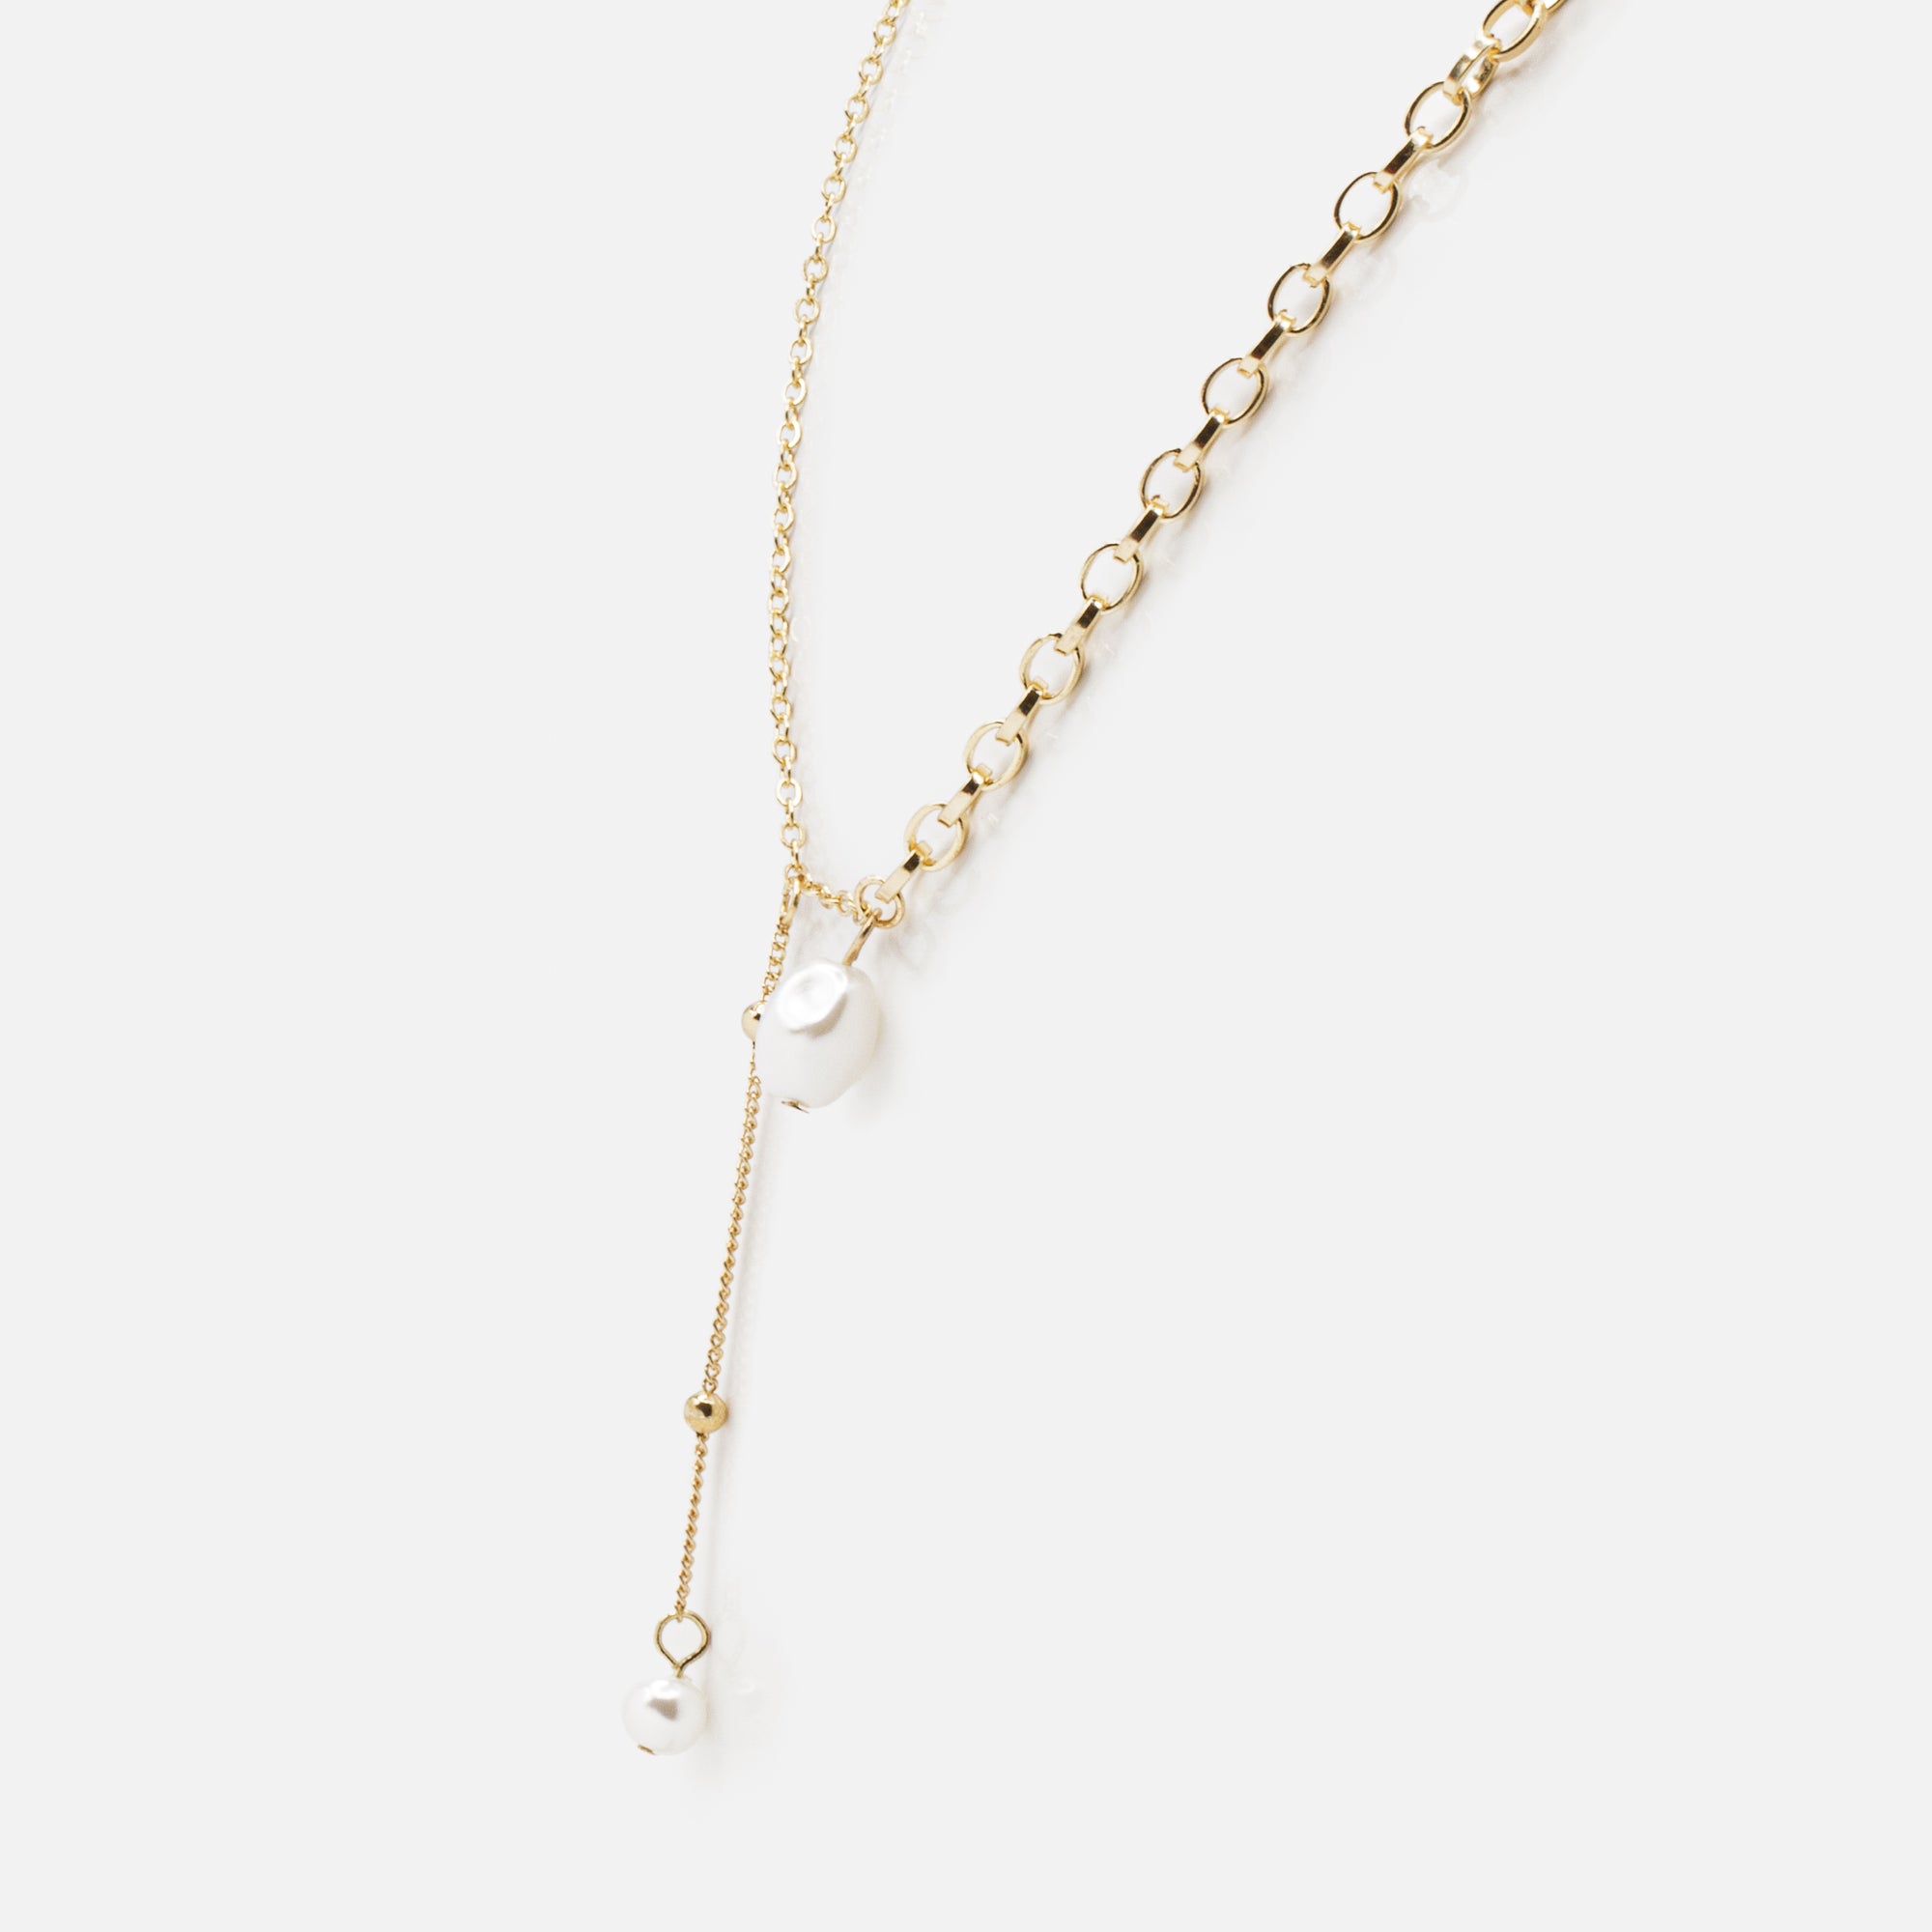 Gold necklace with cable links in two ways and asymmetrical pearl pendants